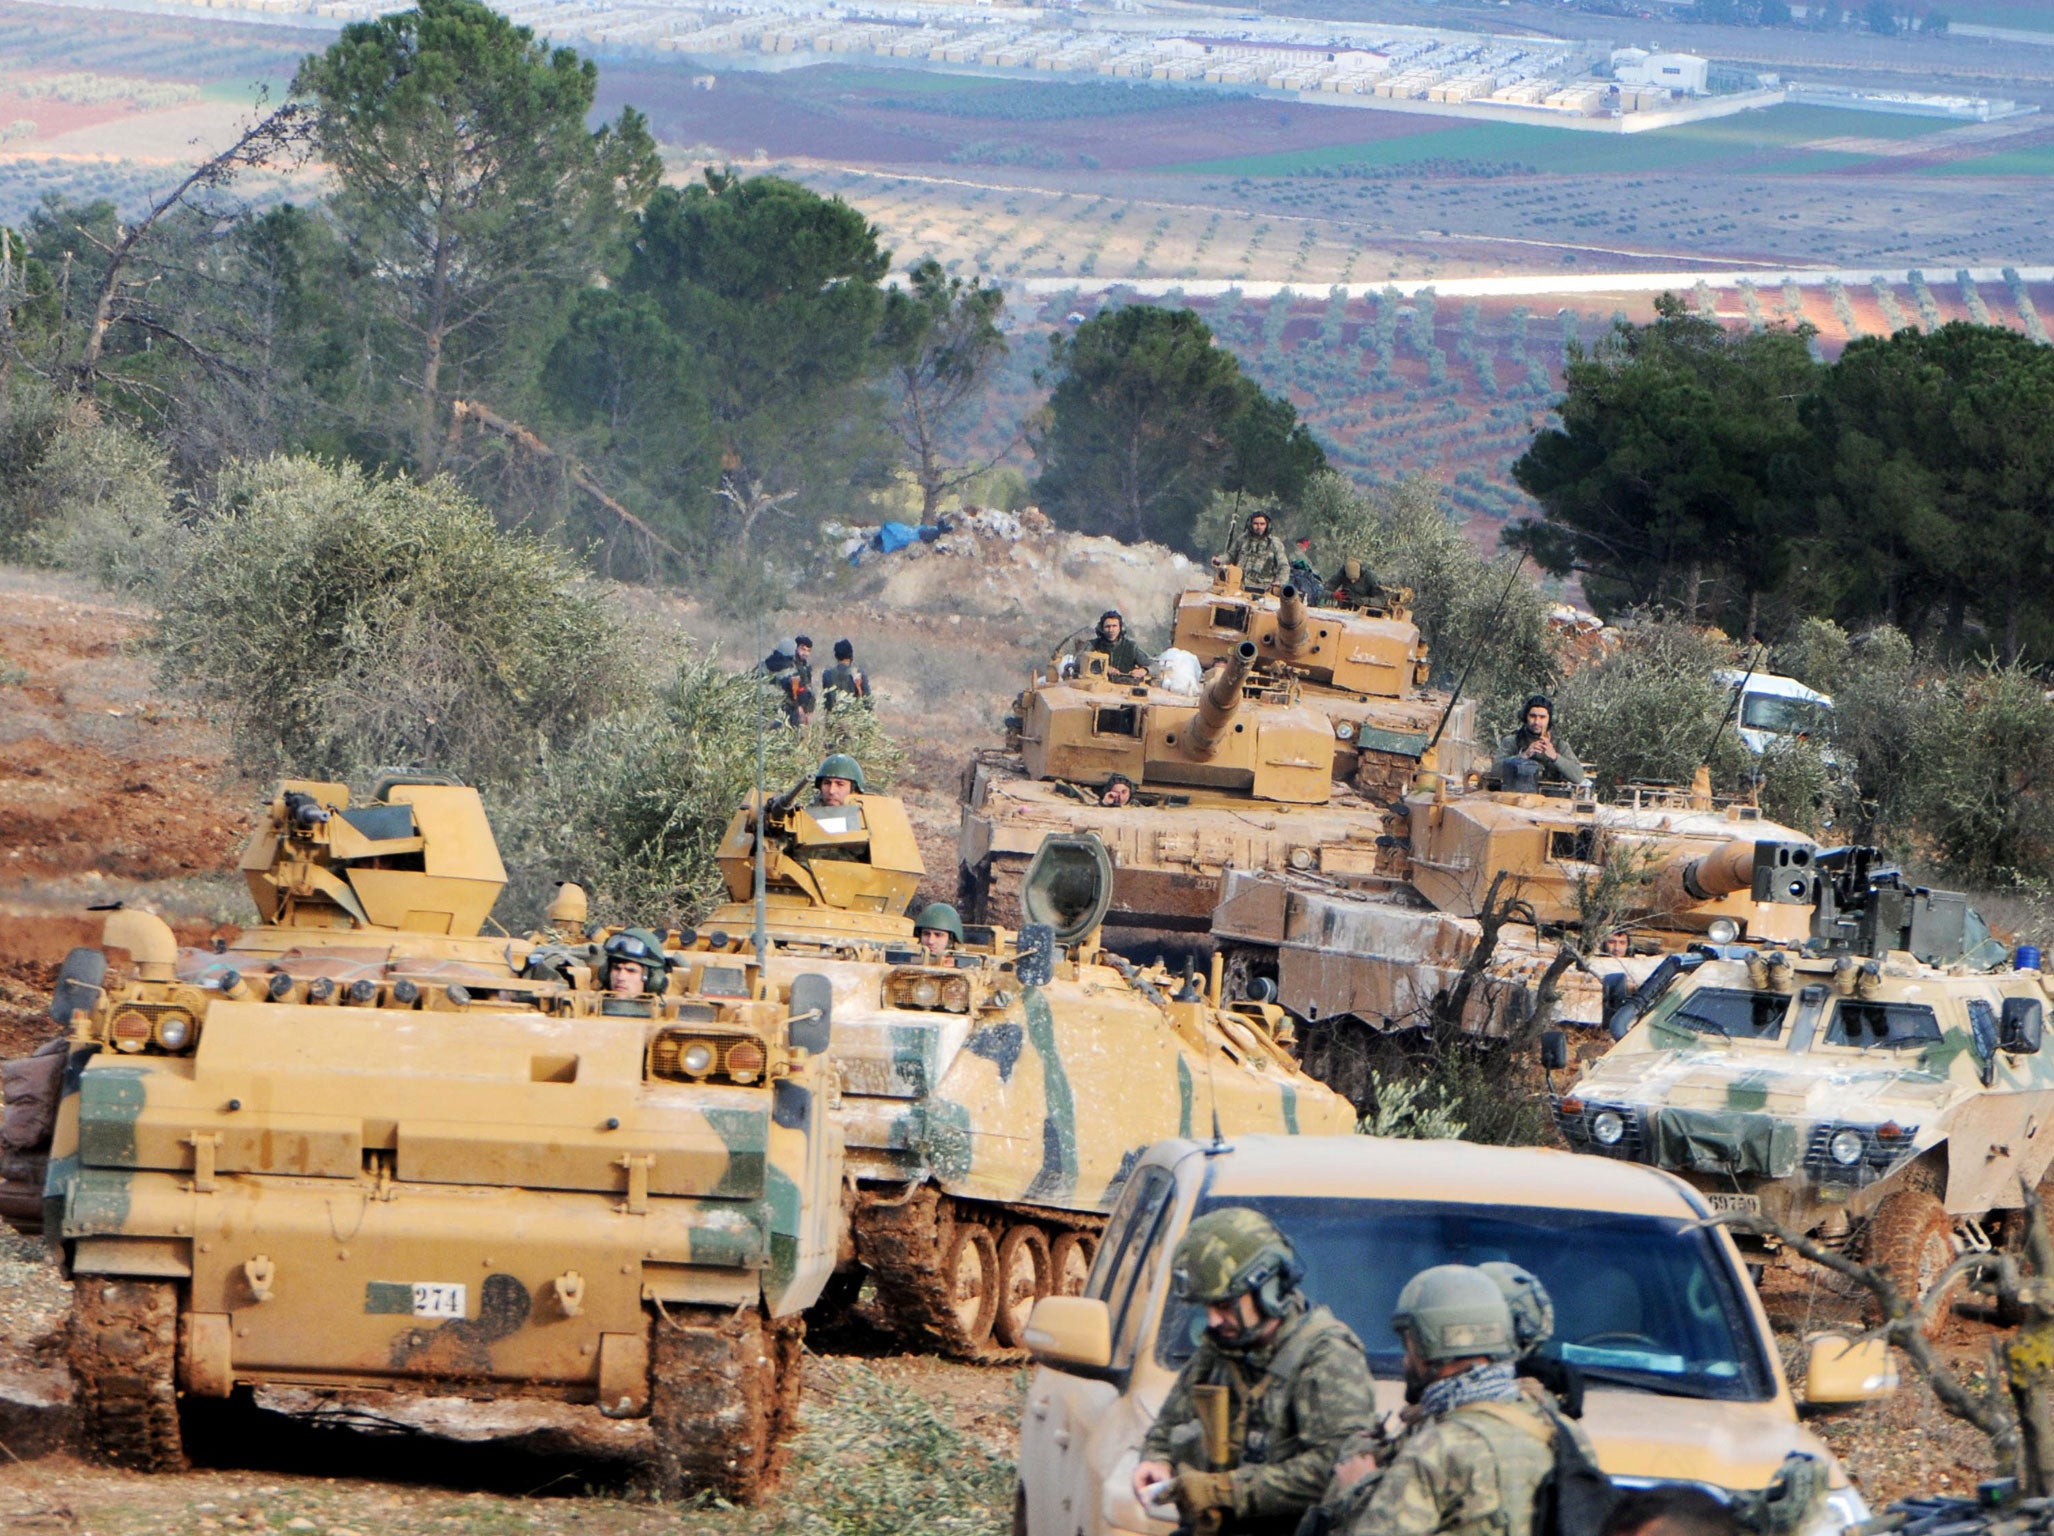 Turkish troops take control of Bursayah hill, which separates the Kurdish-held enclave of Afrin from the Turkey-controlled town of Azaz